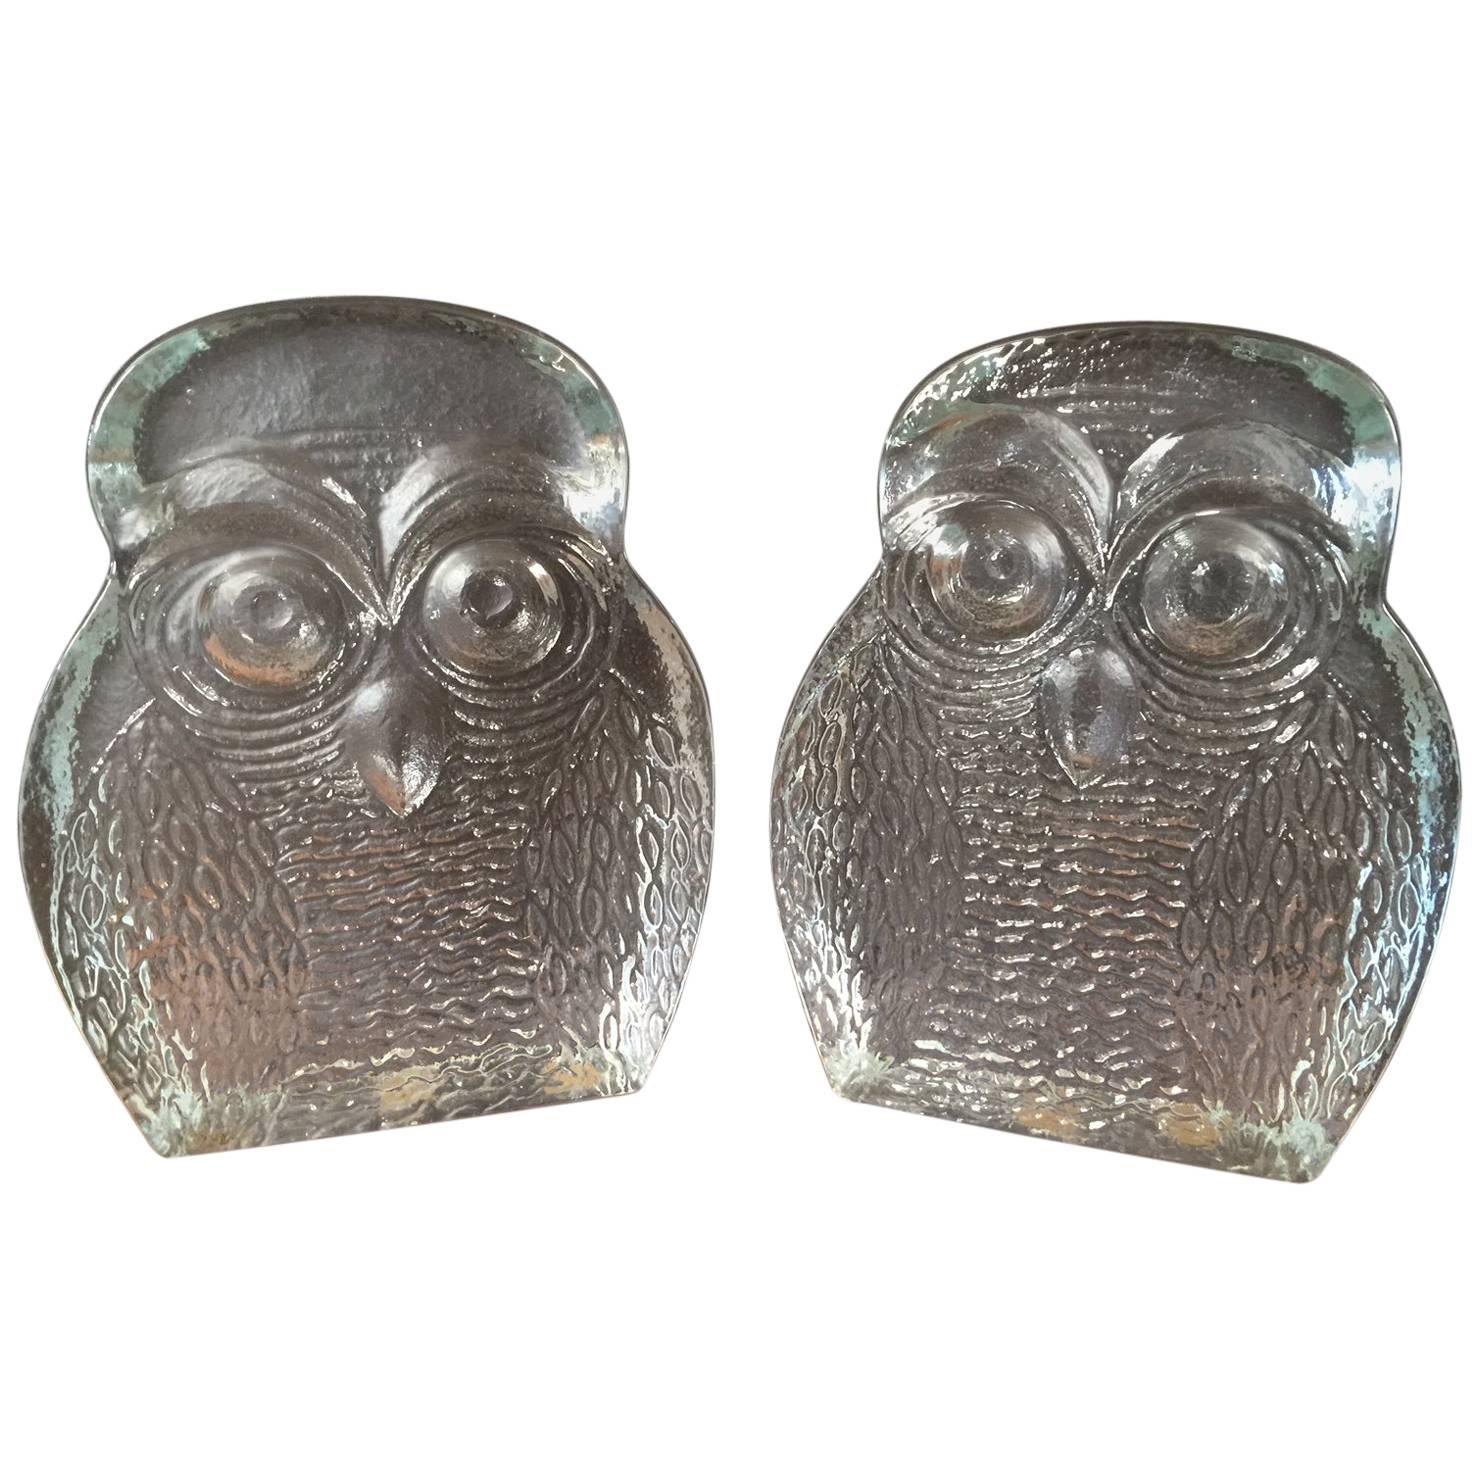 Pair of Midcentury Glass Owl Bookends by Blenko